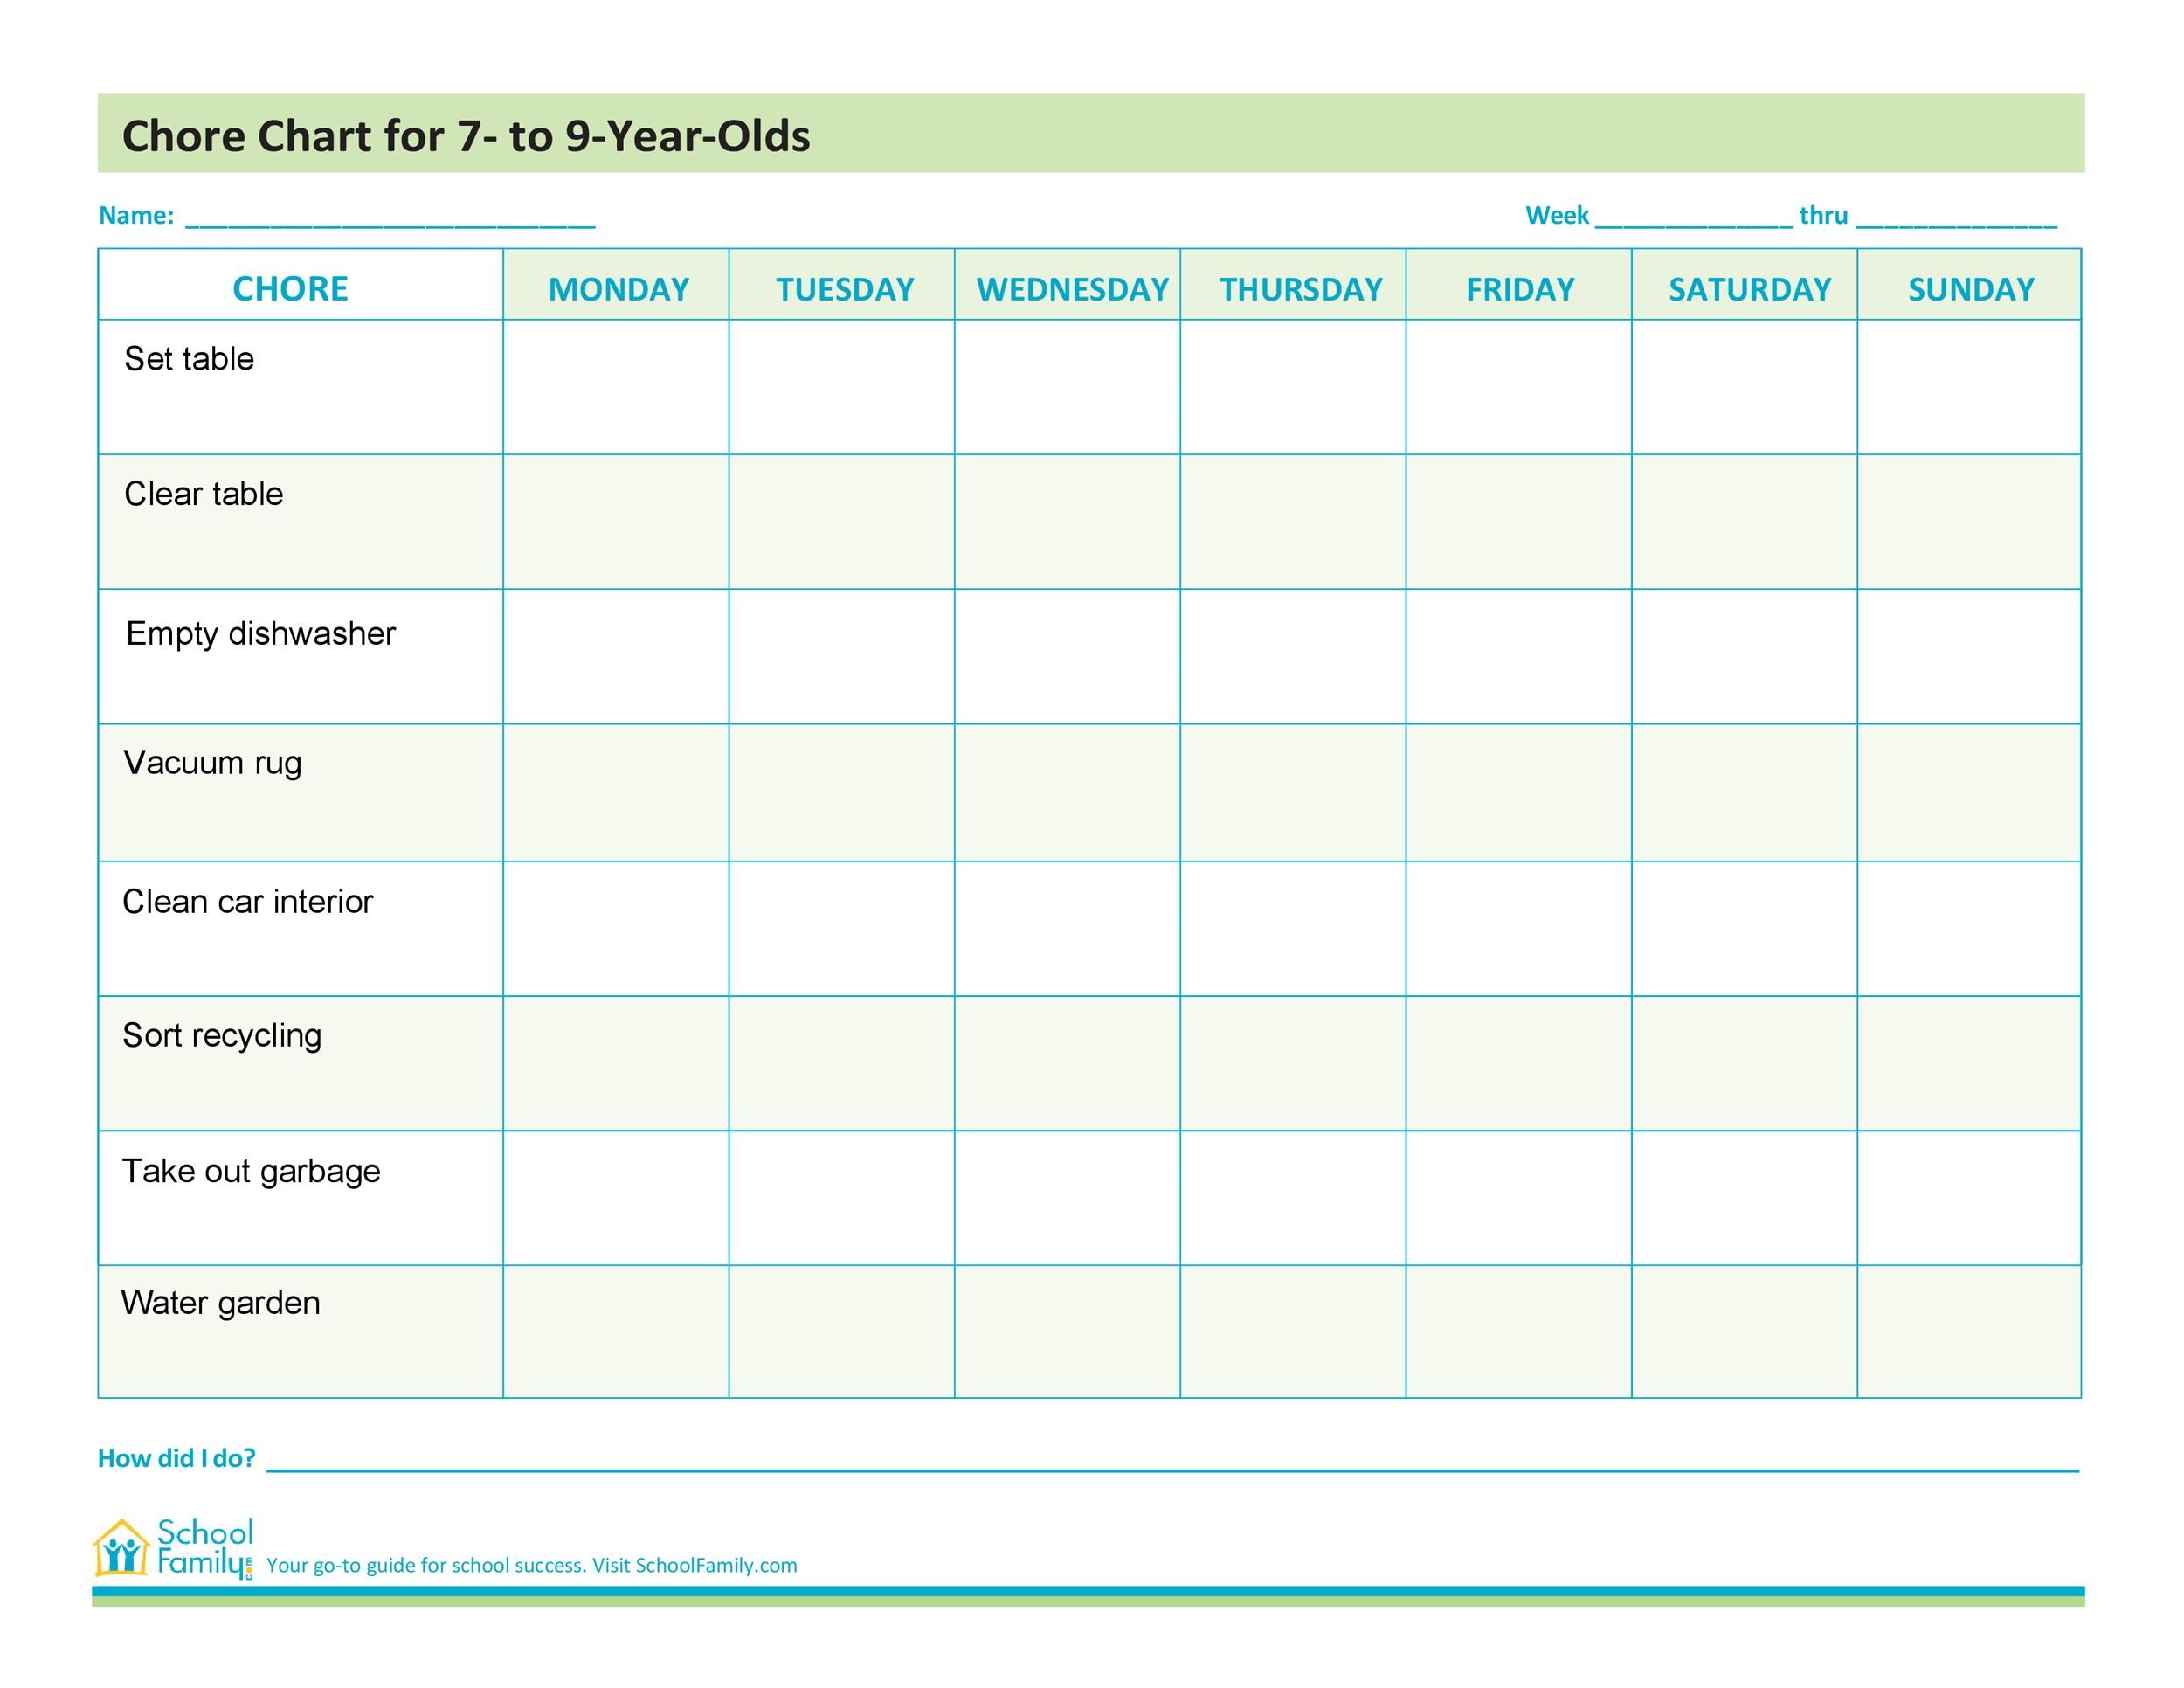 Chore Chart For Five Year Old